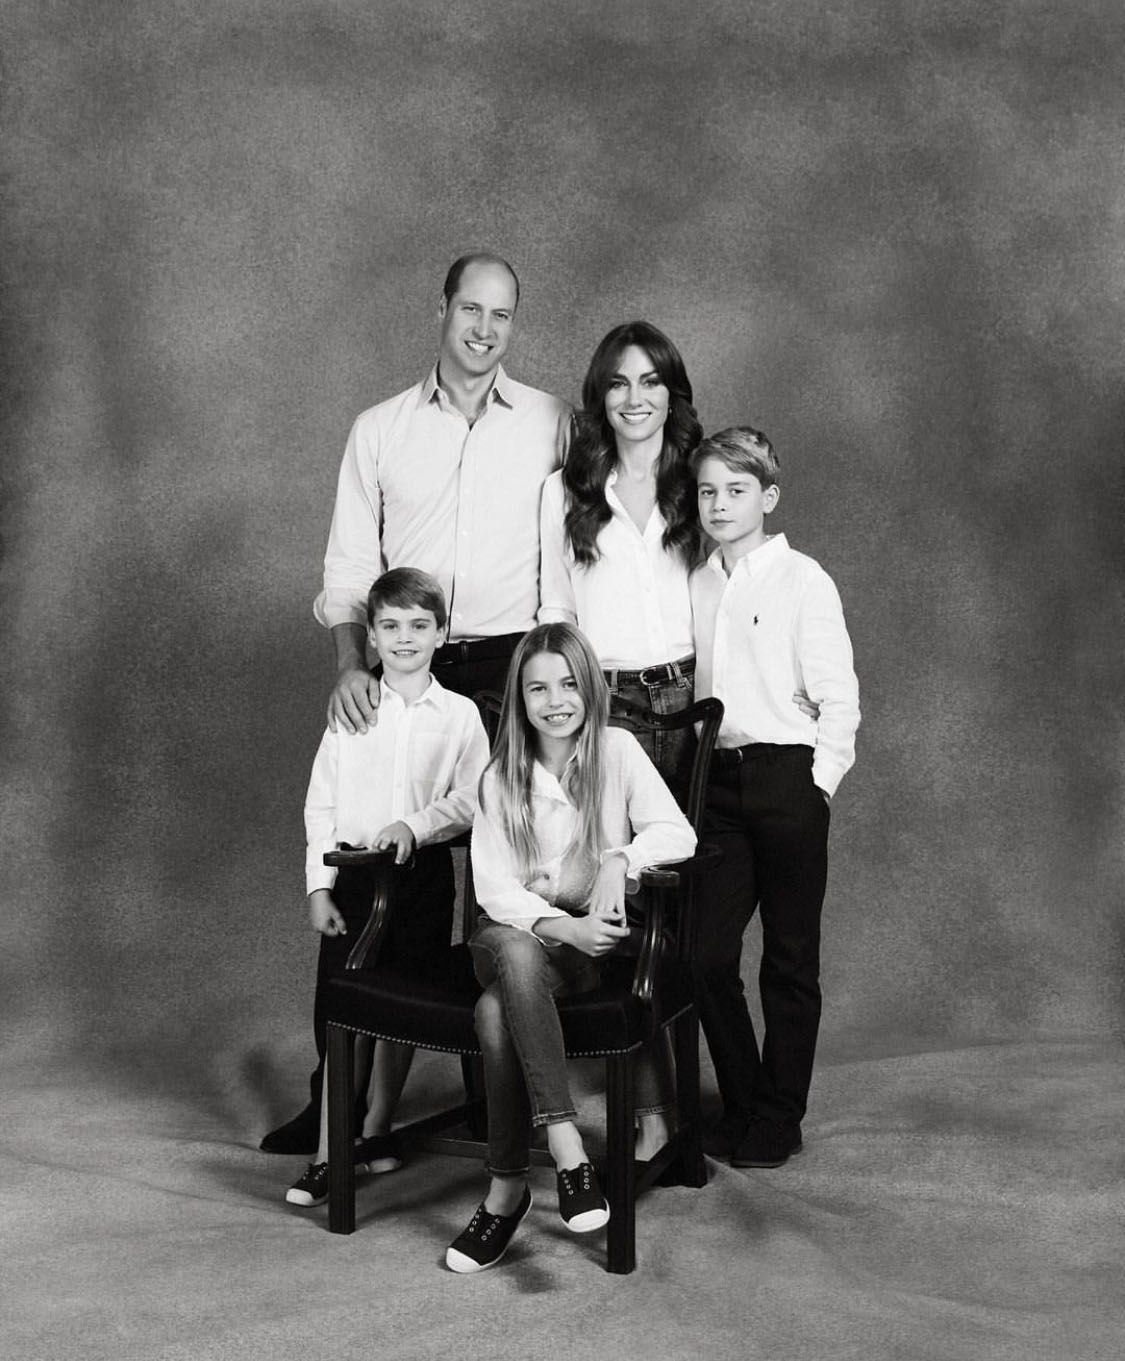 Britain: William and Kate-2 published a new photo with their children